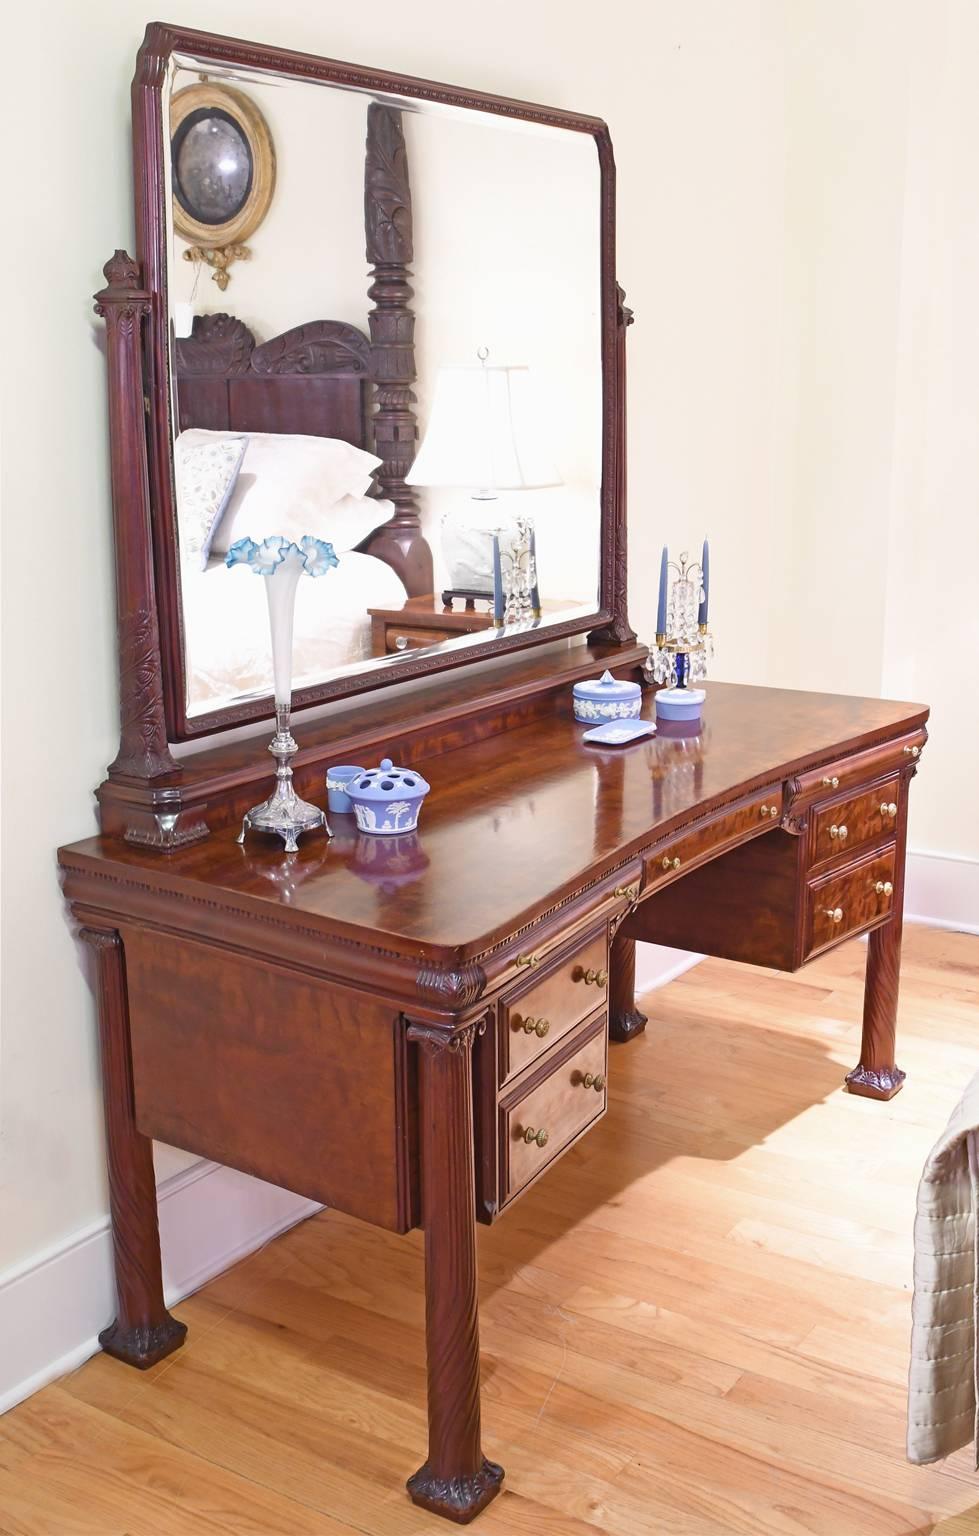 A beautiful and unique Belle Époque Dressing Table in mahogany from the American Golden Age, circa 1890-1910, one of the finest periods of cabinet-making in NYC. Inspired by Neoclassical architecture, this dressing table is beautifully-designed